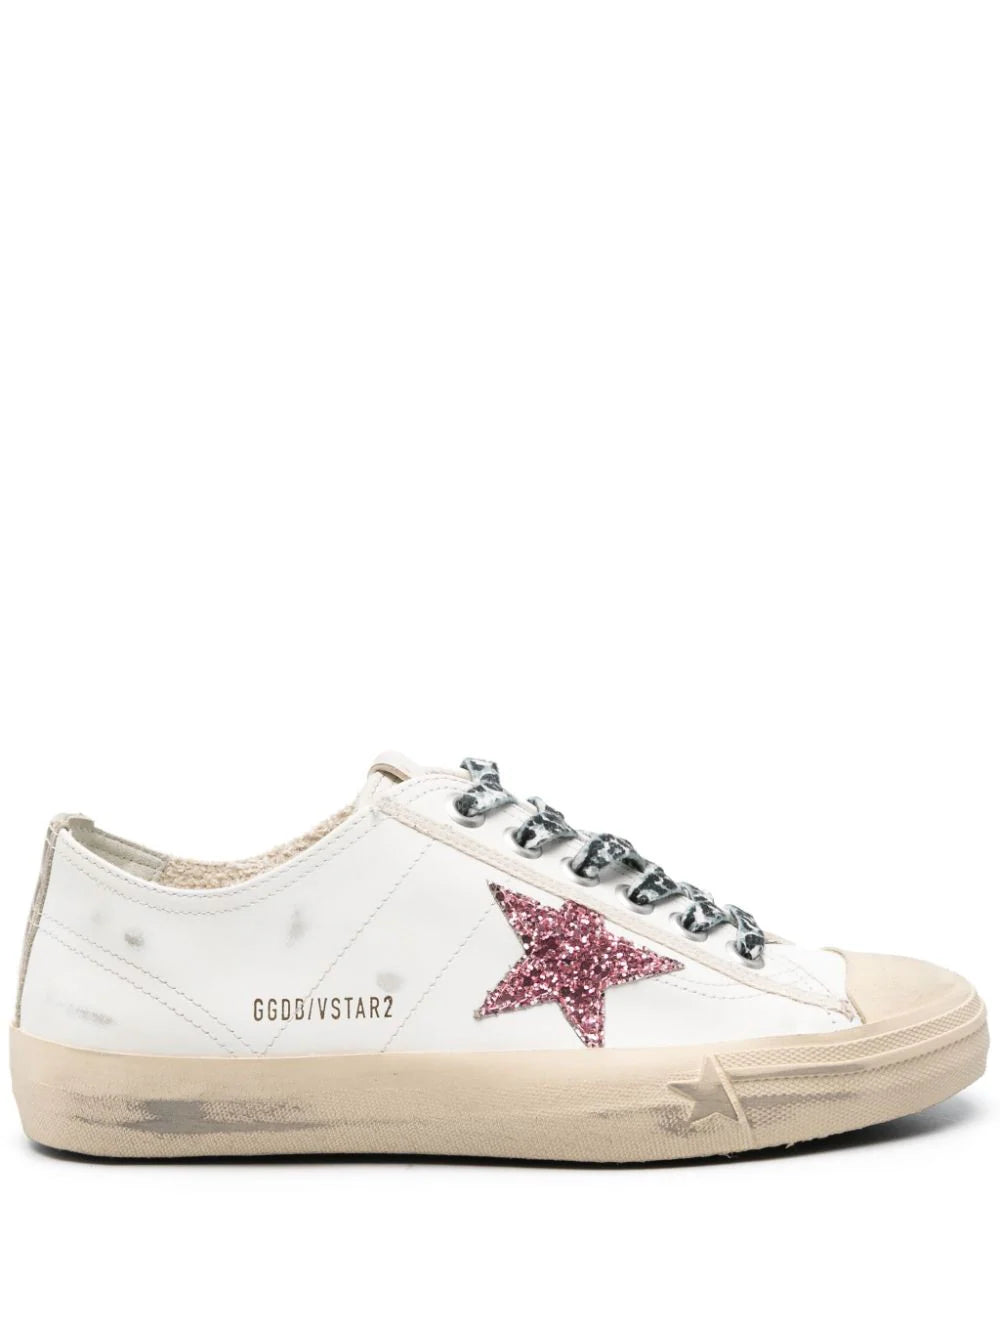 V-Star distressed sneakers